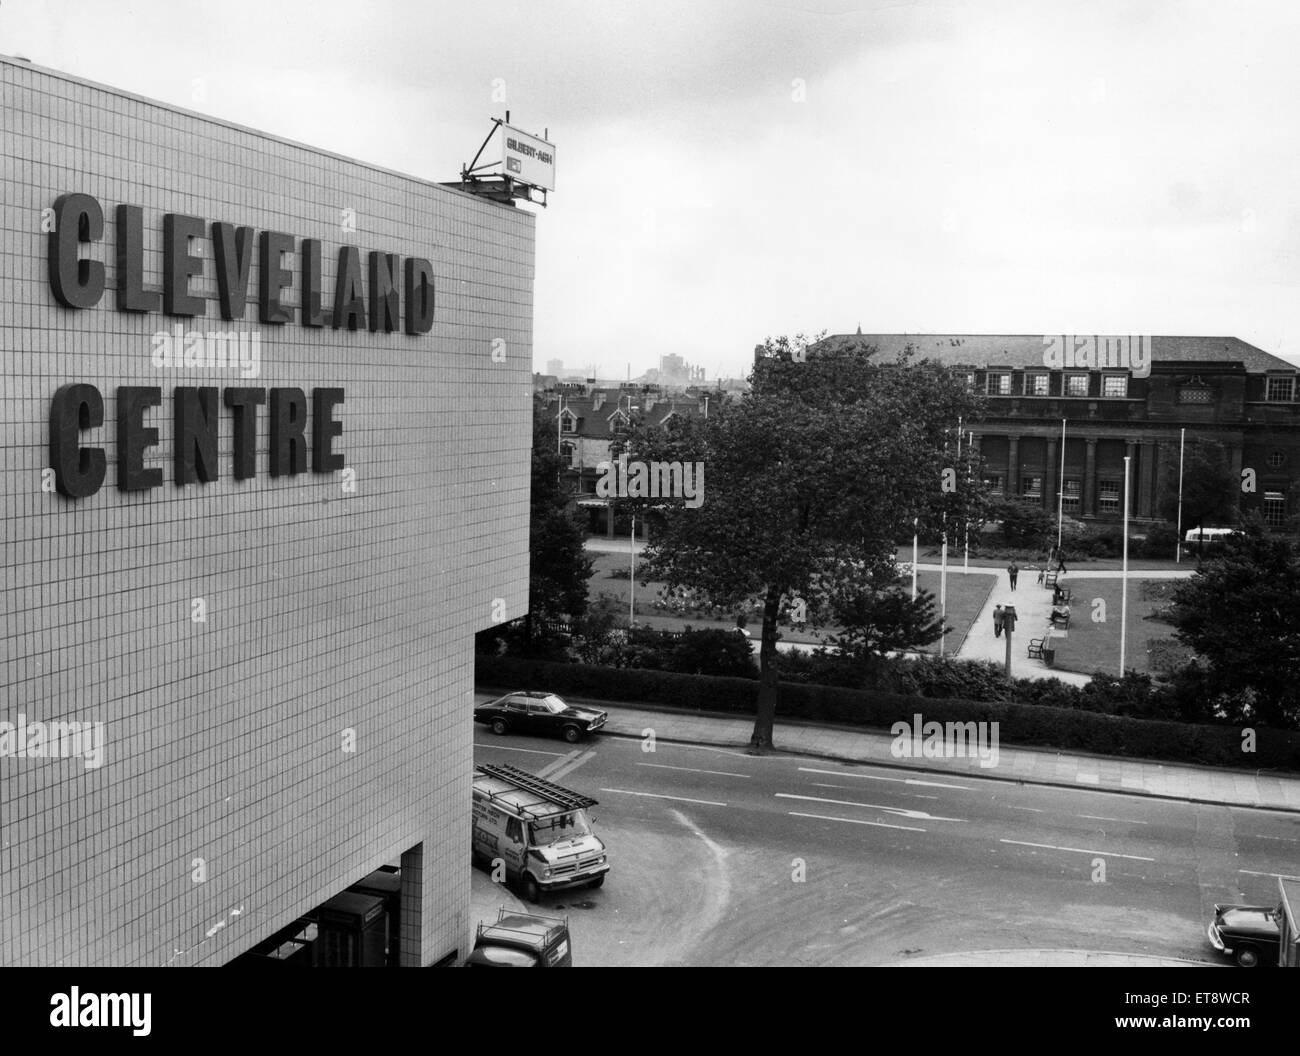 Cleveland Centre, Middlesbrough, 3rd August 1972. Stock Photo